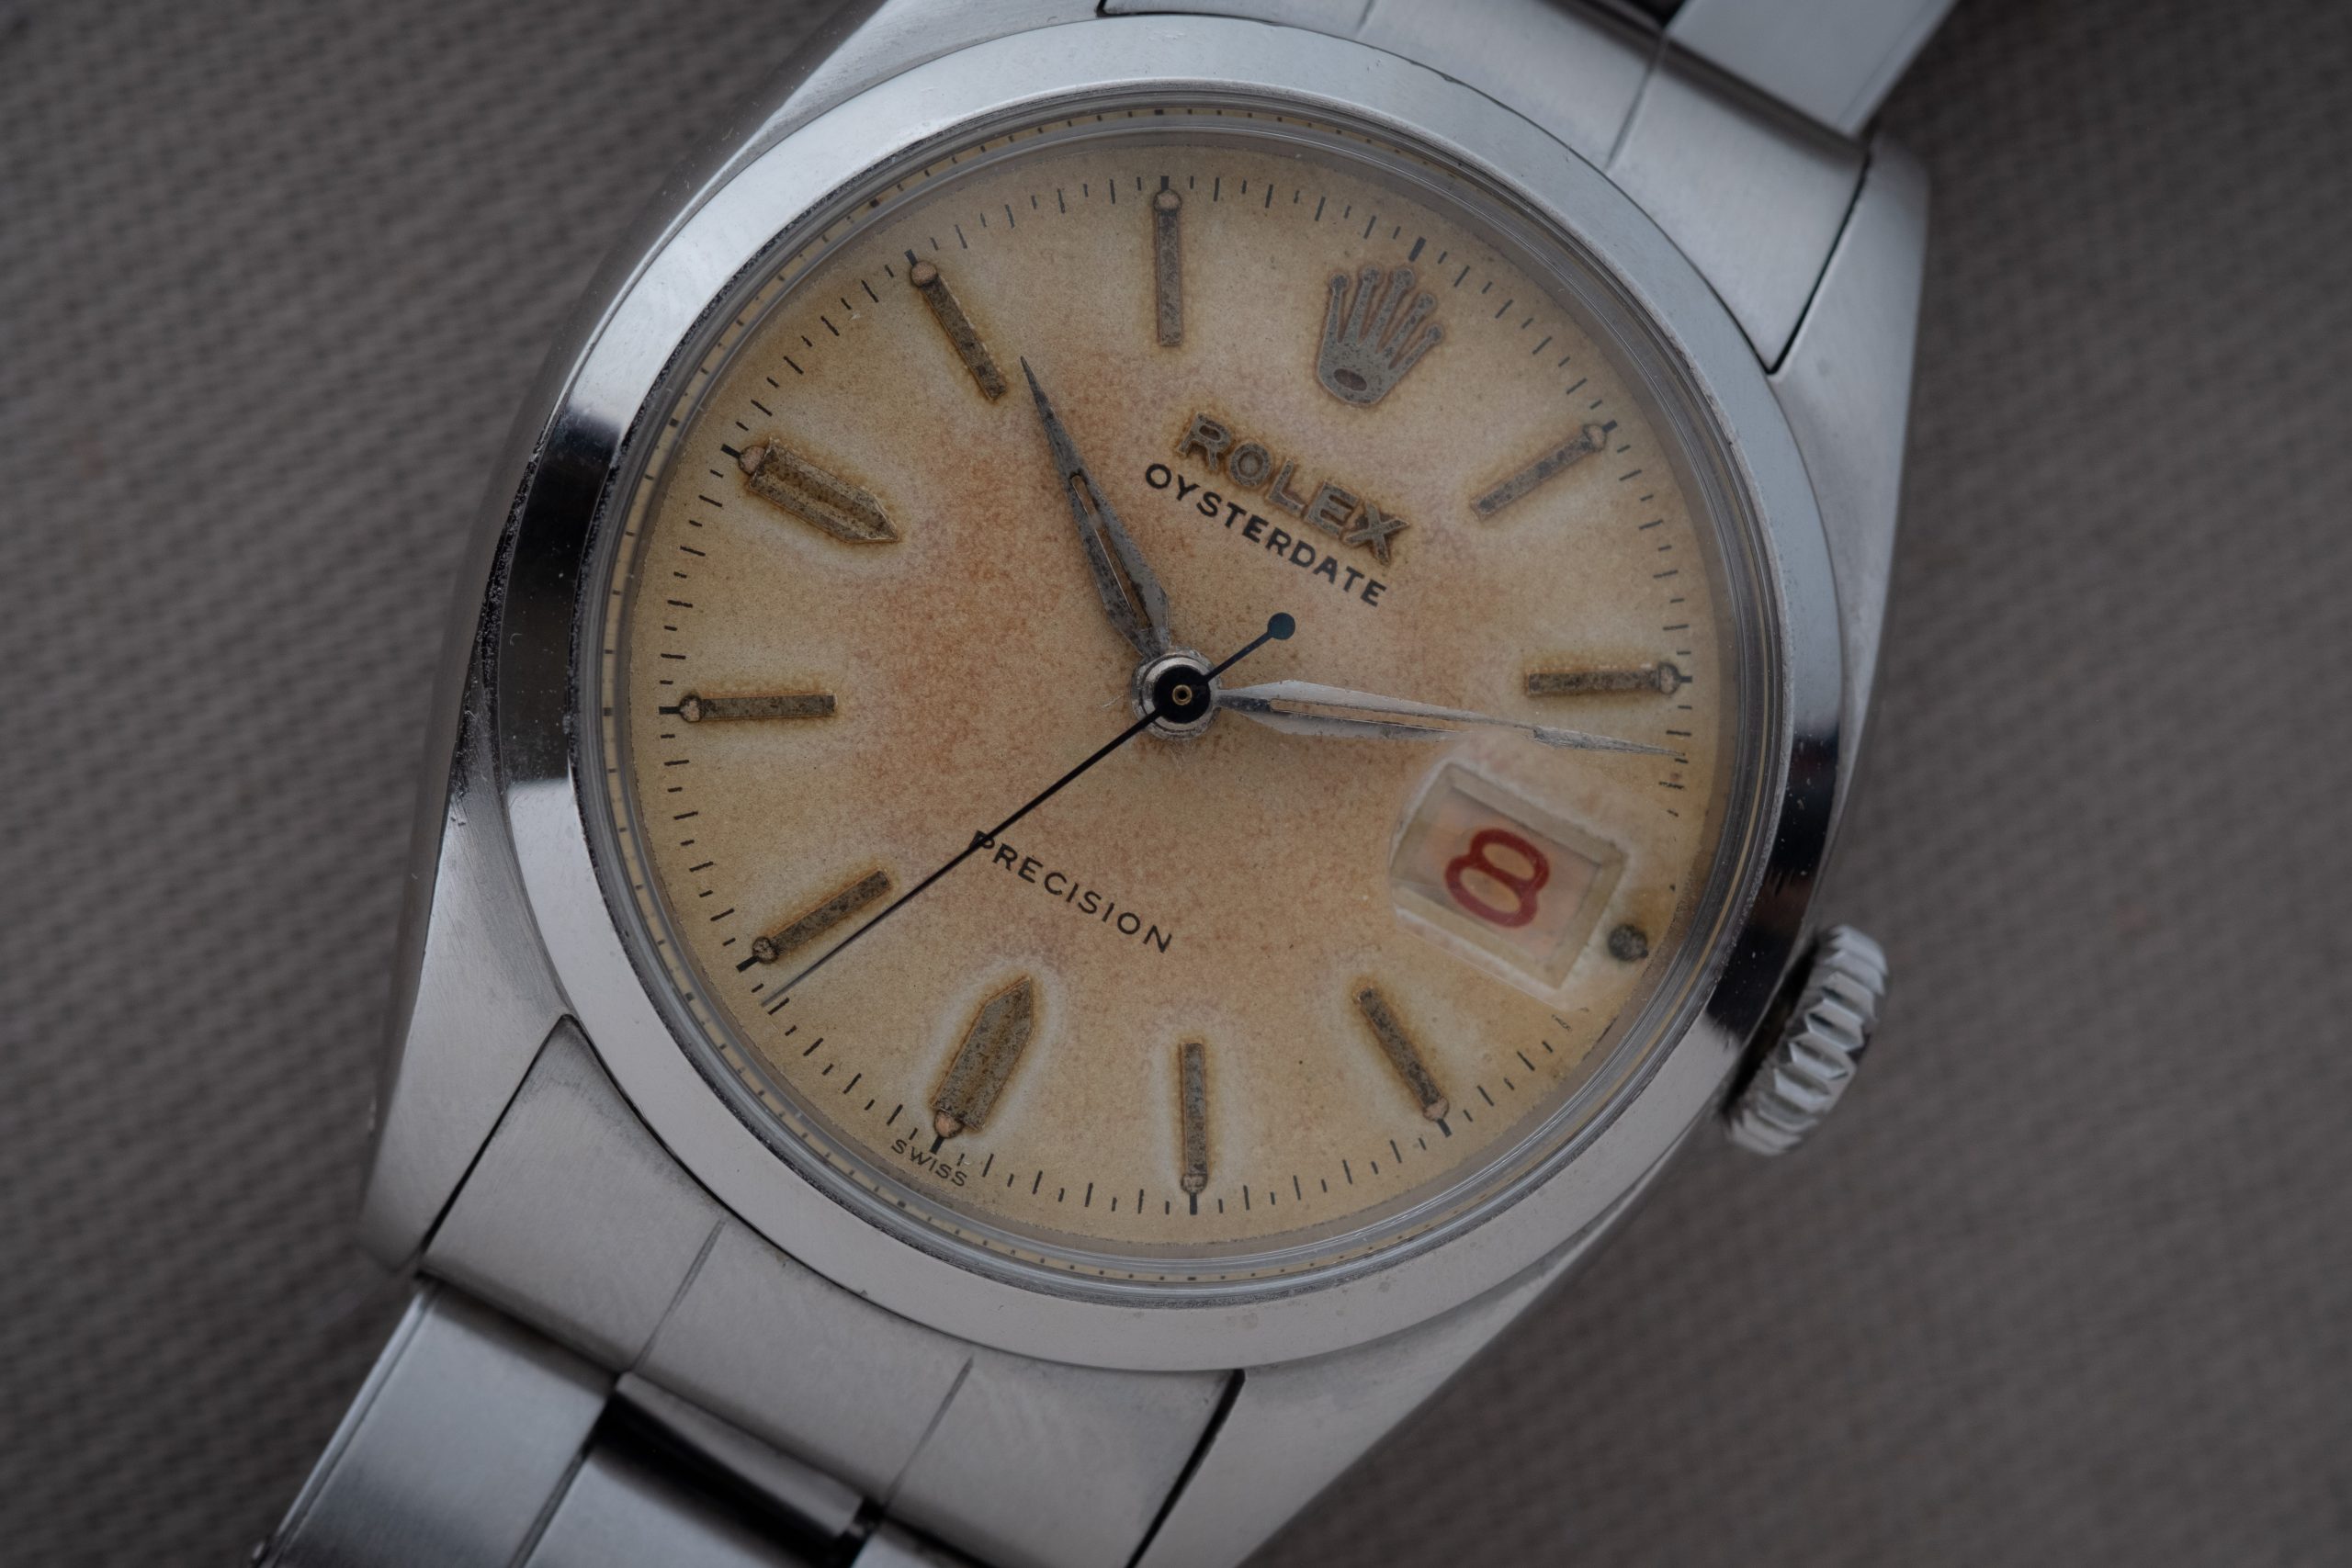 Curating the Collection – A Rolex Oyster Date Reference 6494 Captures My Heart